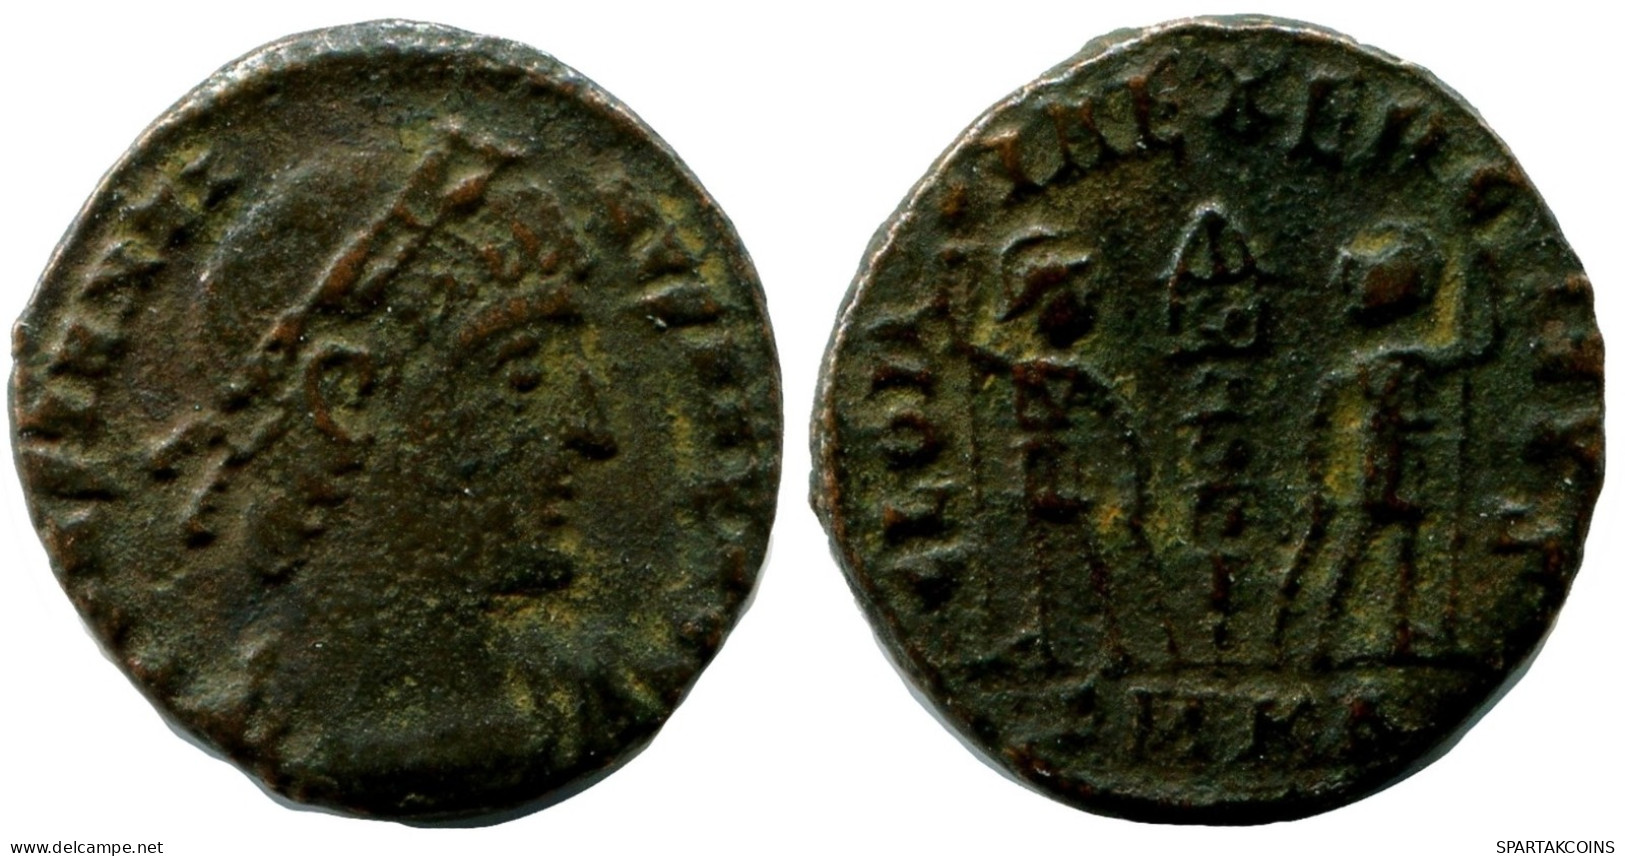 CONSTANTINE I MINTED IN CYZICUS FROM THE ROYAL ONTARIO MUSEUM #ANC11038.14.D.A - El Imperio Christiano (307 / 363)